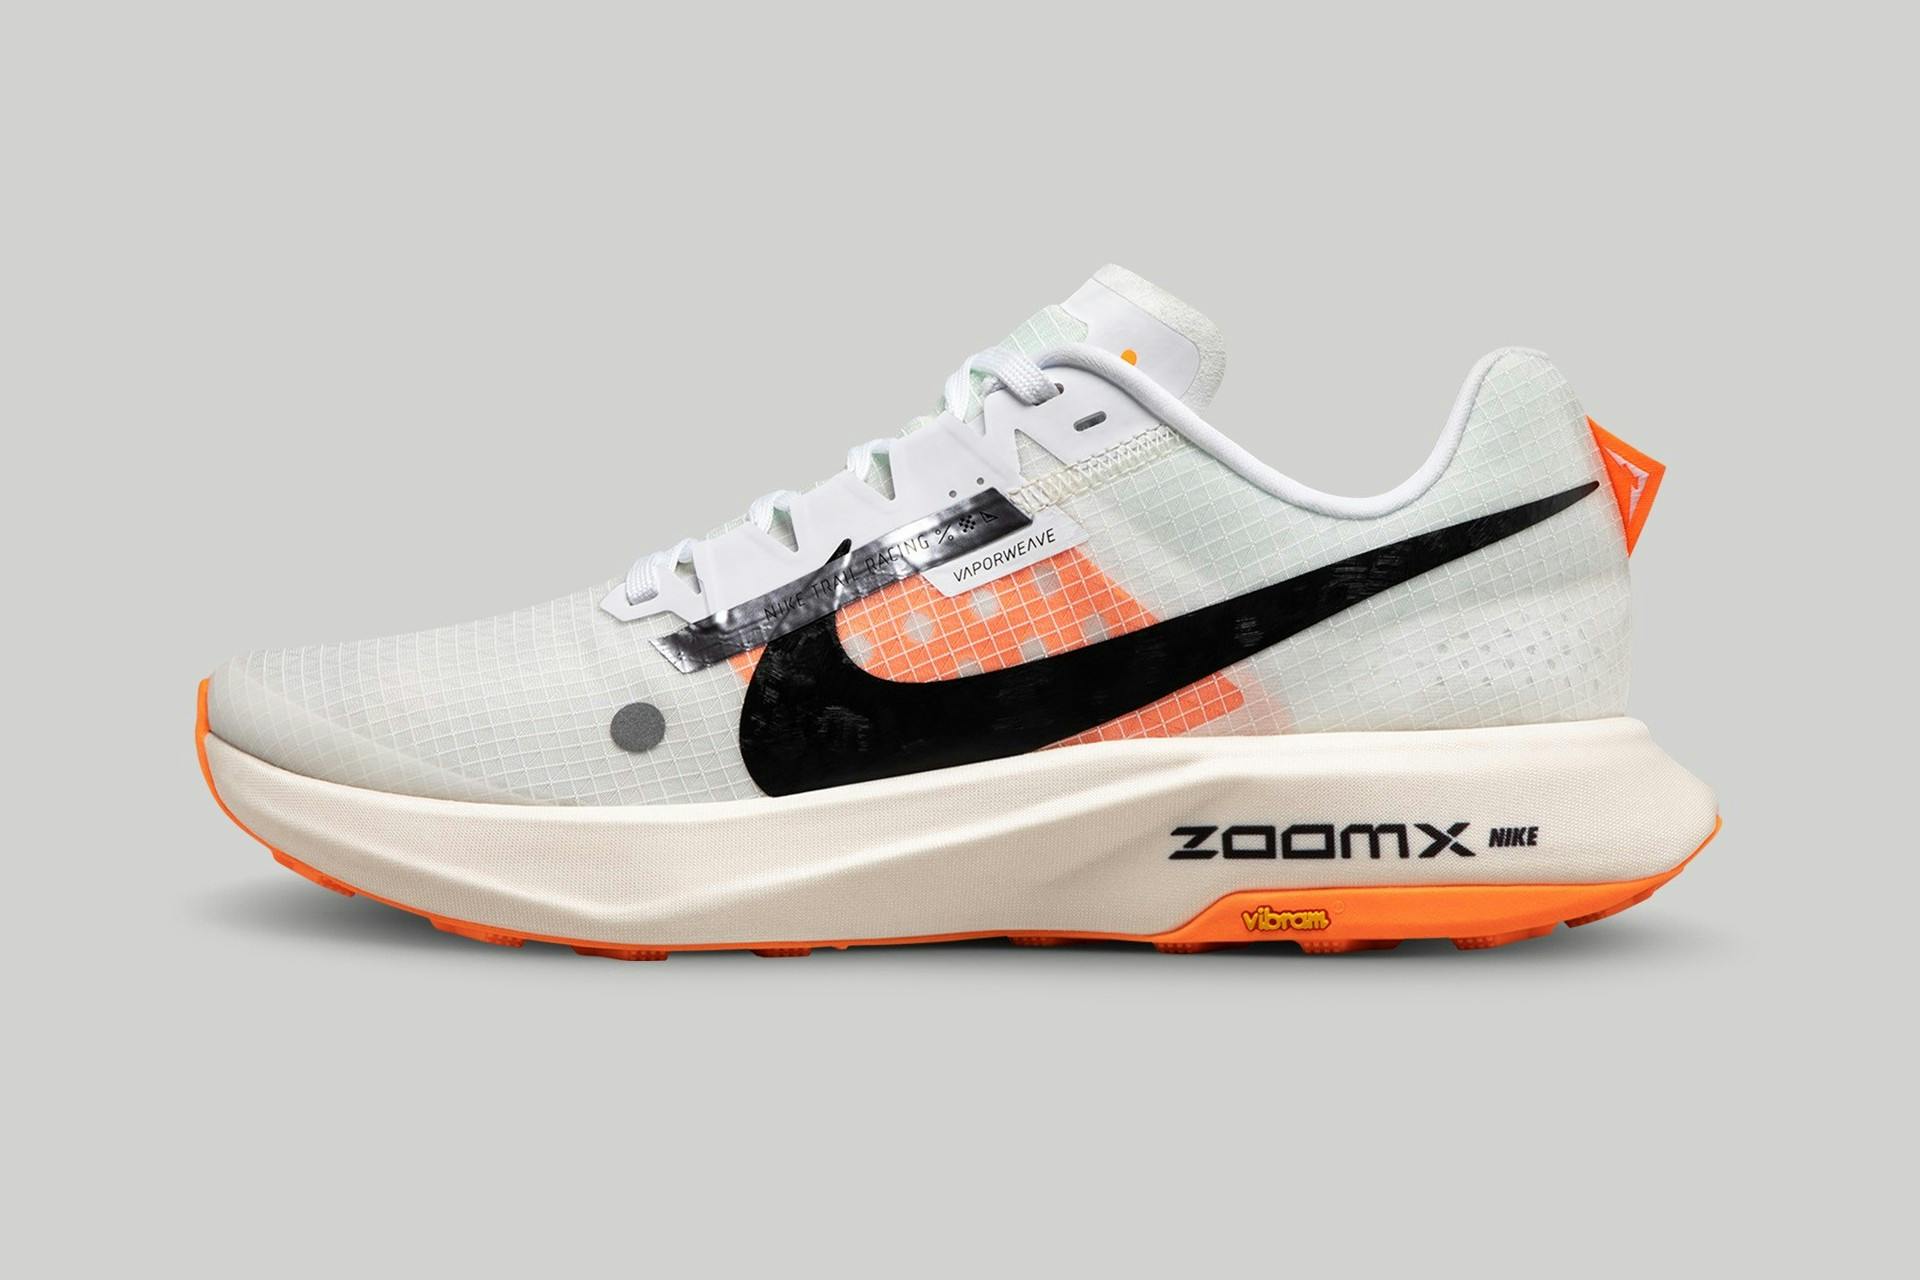 nike-zoomx-ultrafly-trail-racing-shoes